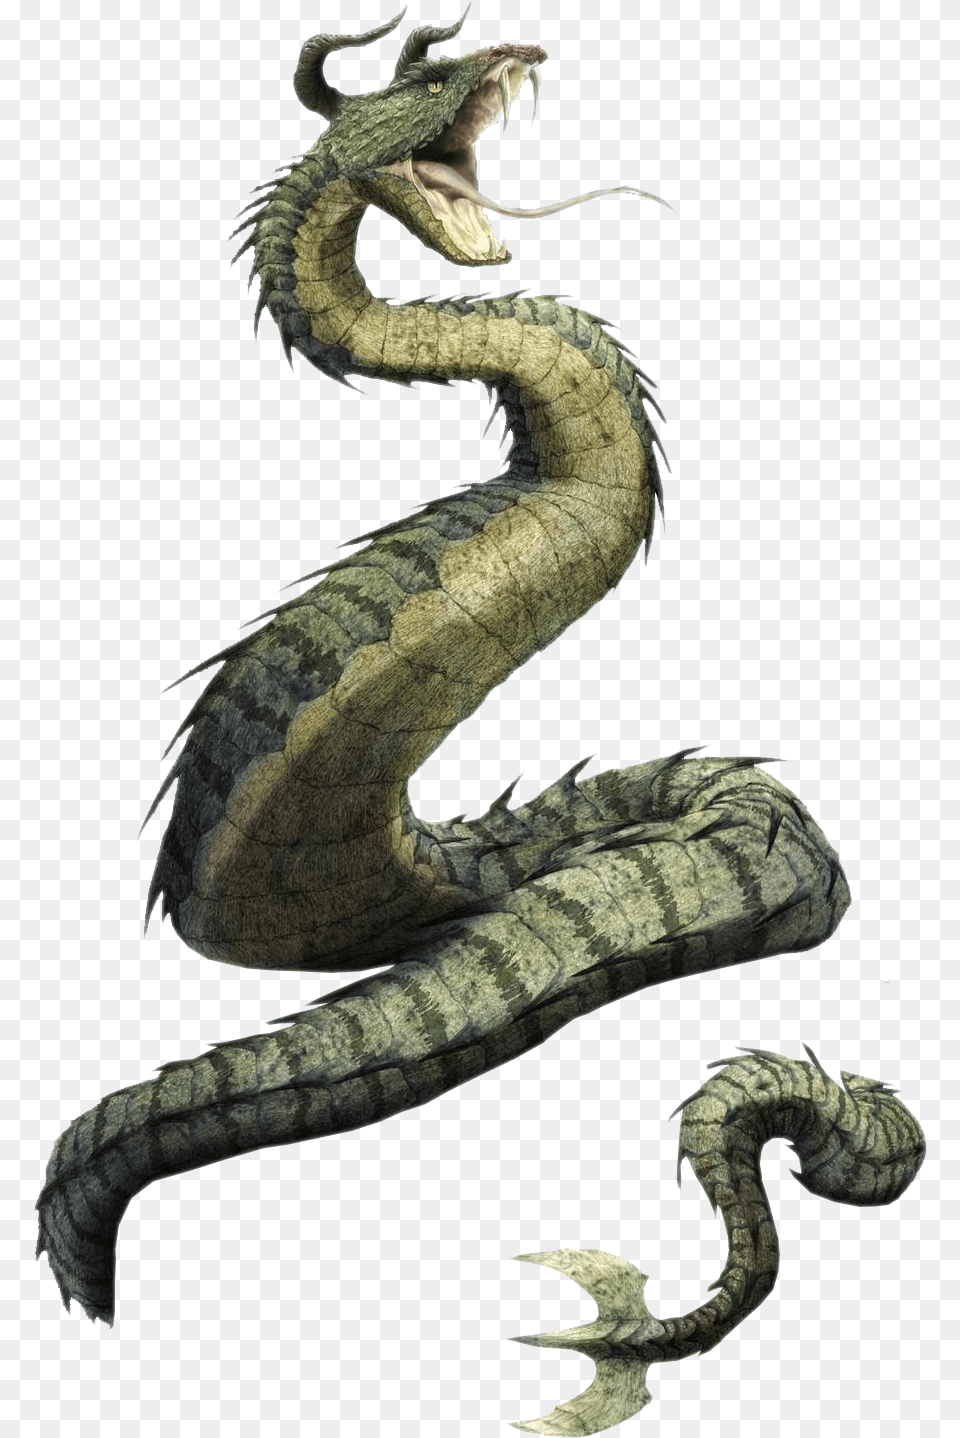 Dtpoo Mythical Snake Creatures, Dragon, Animal, Reptile Png